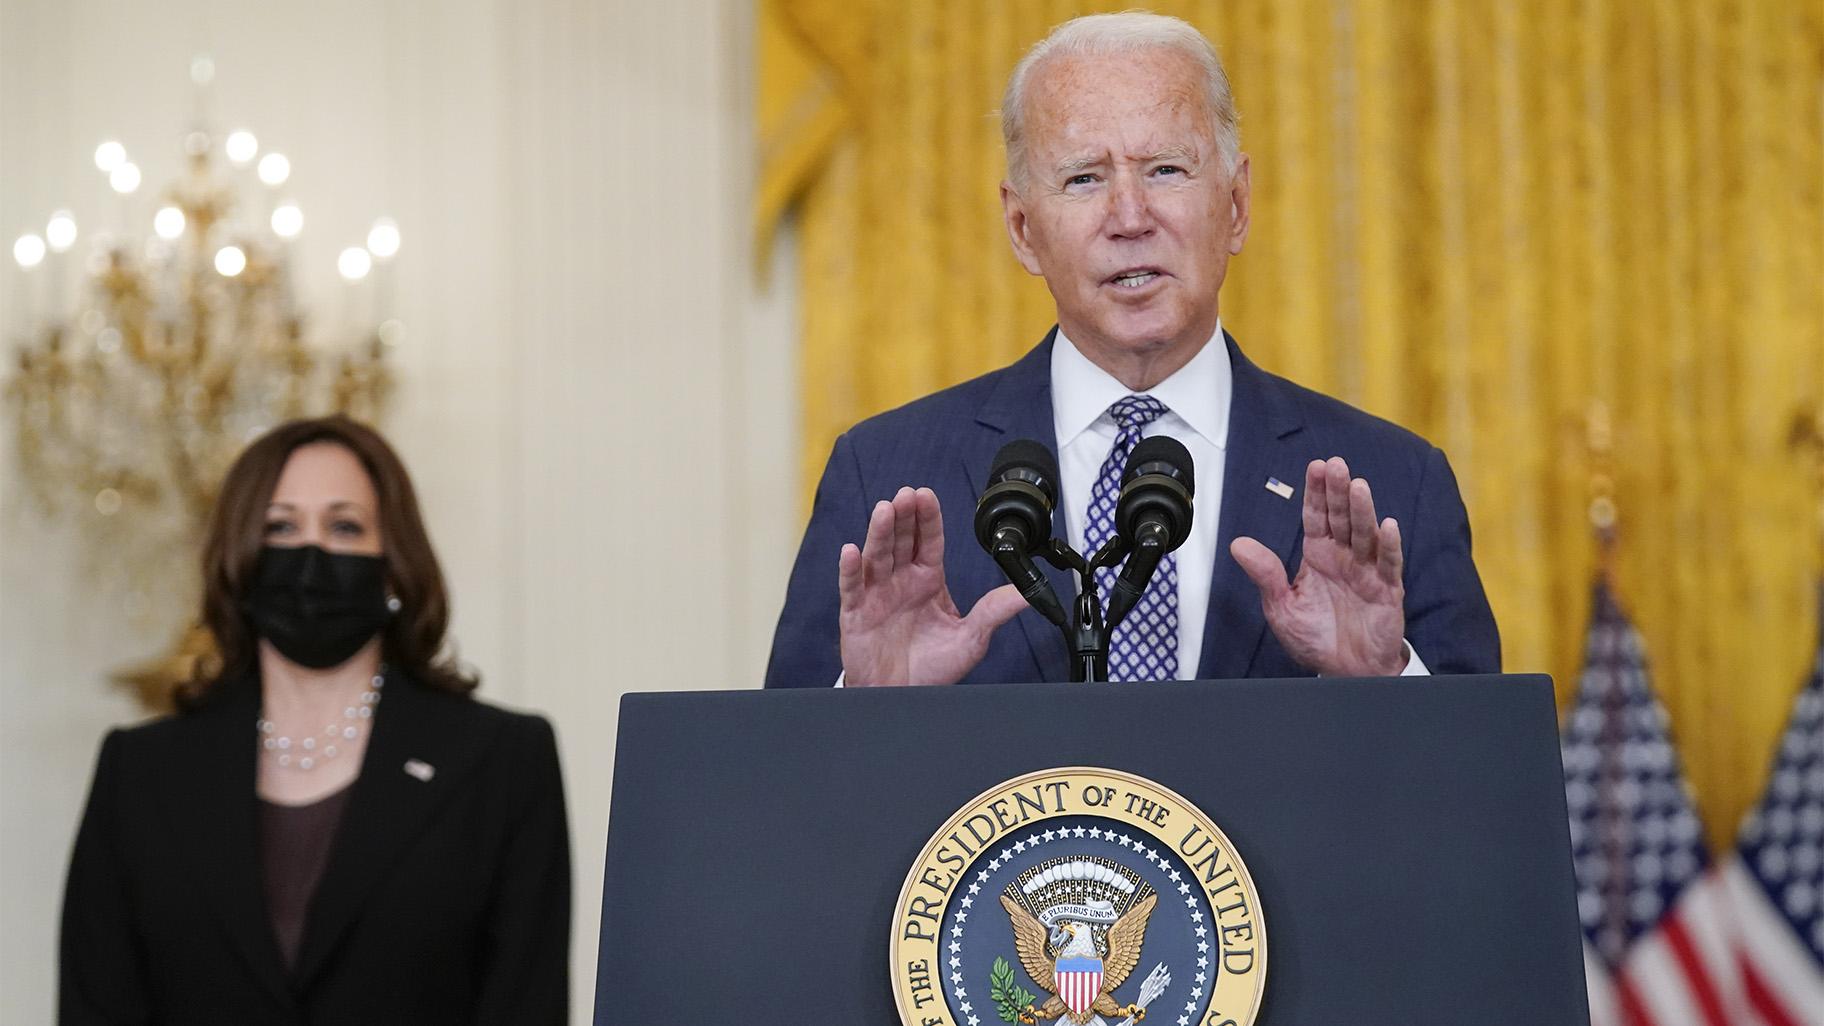 President Joe Biden speaks about the evacuation of American citizens, their families, SIV applicants and vulnerable Afghans in the East Room of the White House, Friday, Aug. 20, 2021, in Washington. Vice President Kamala Harris listens at left. (AP Photo / Manuel Balce Ceneta)